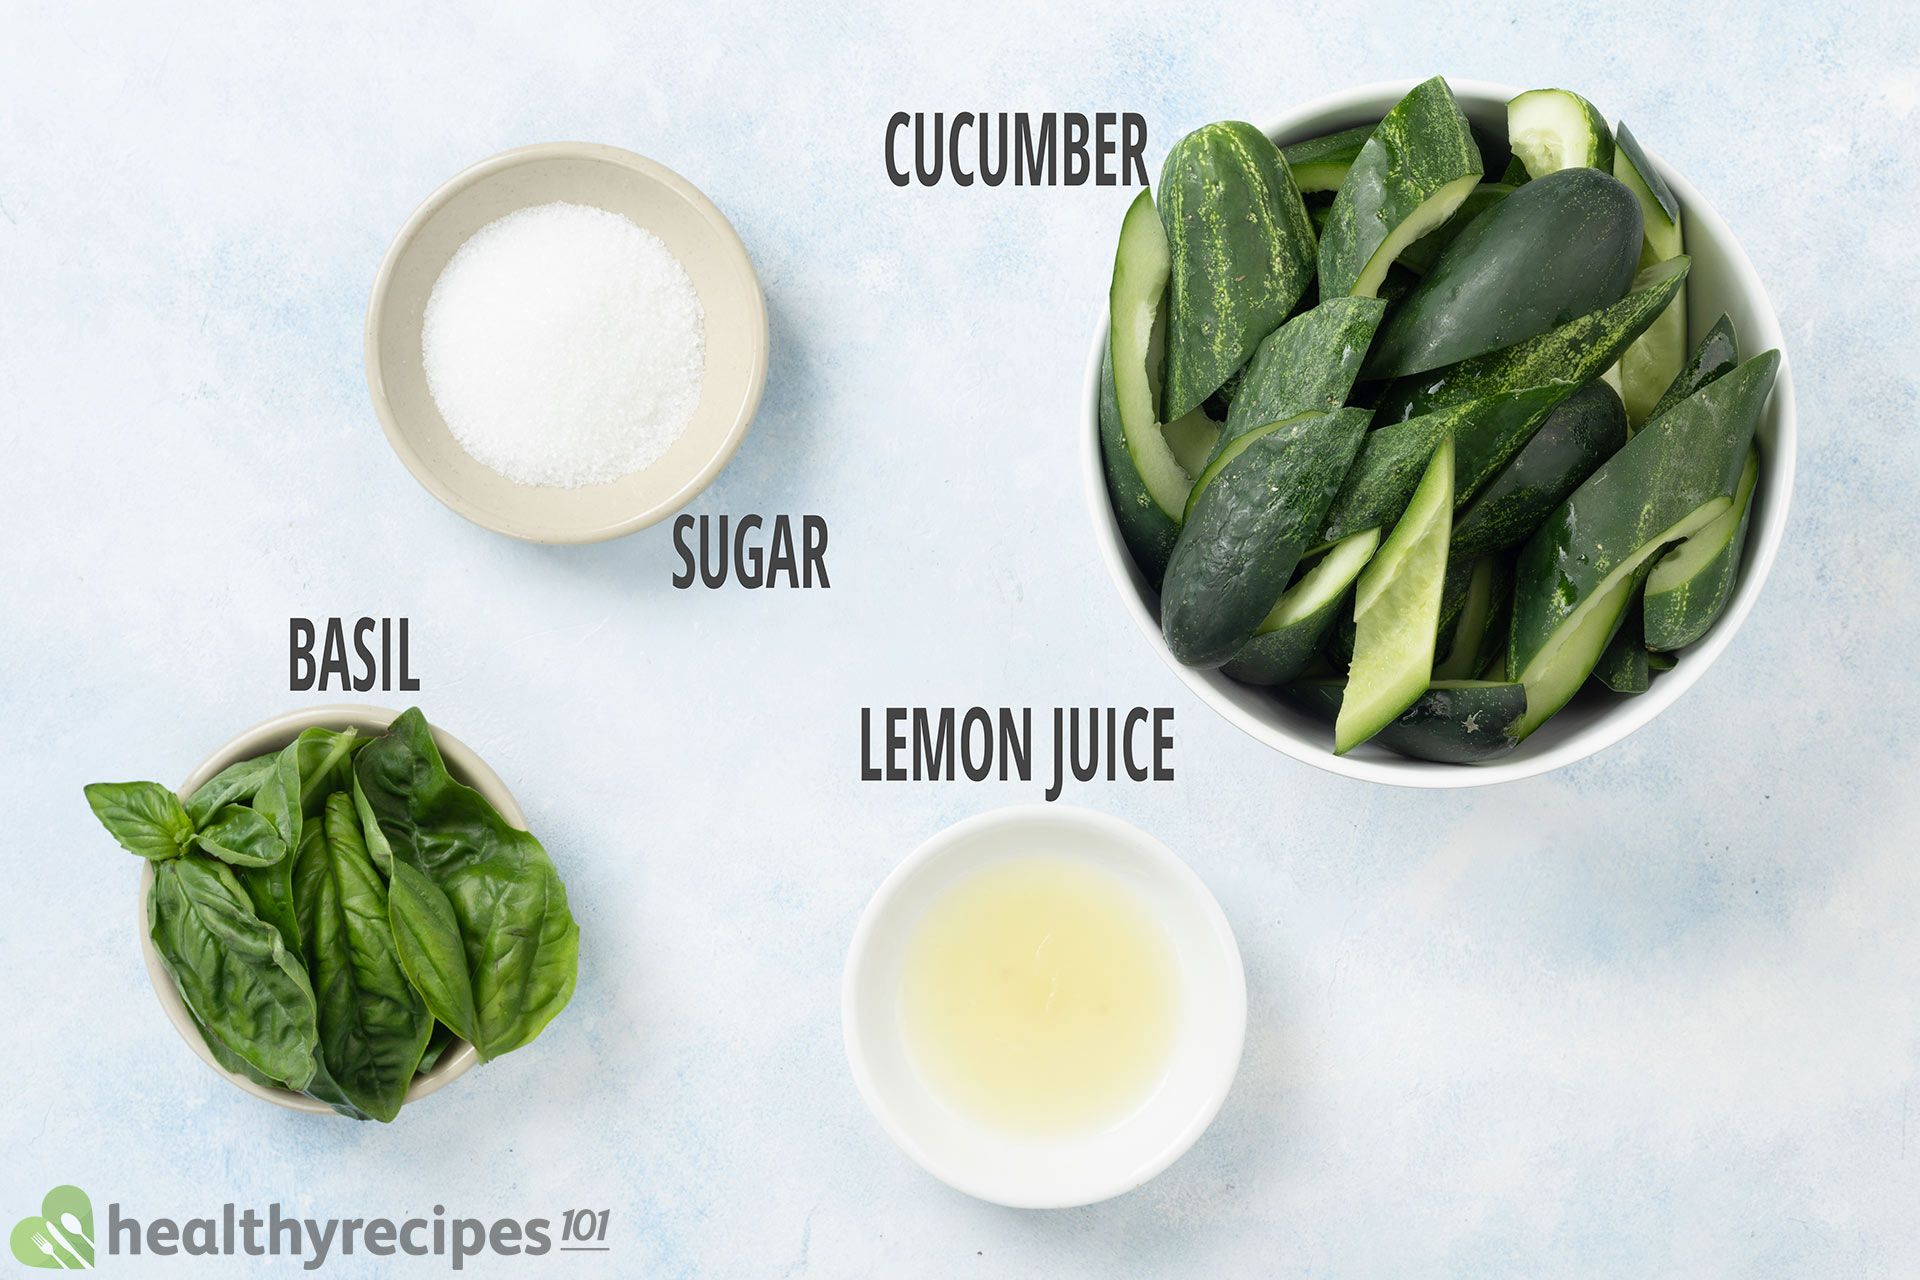 ingredients for cucumber and lemon juice